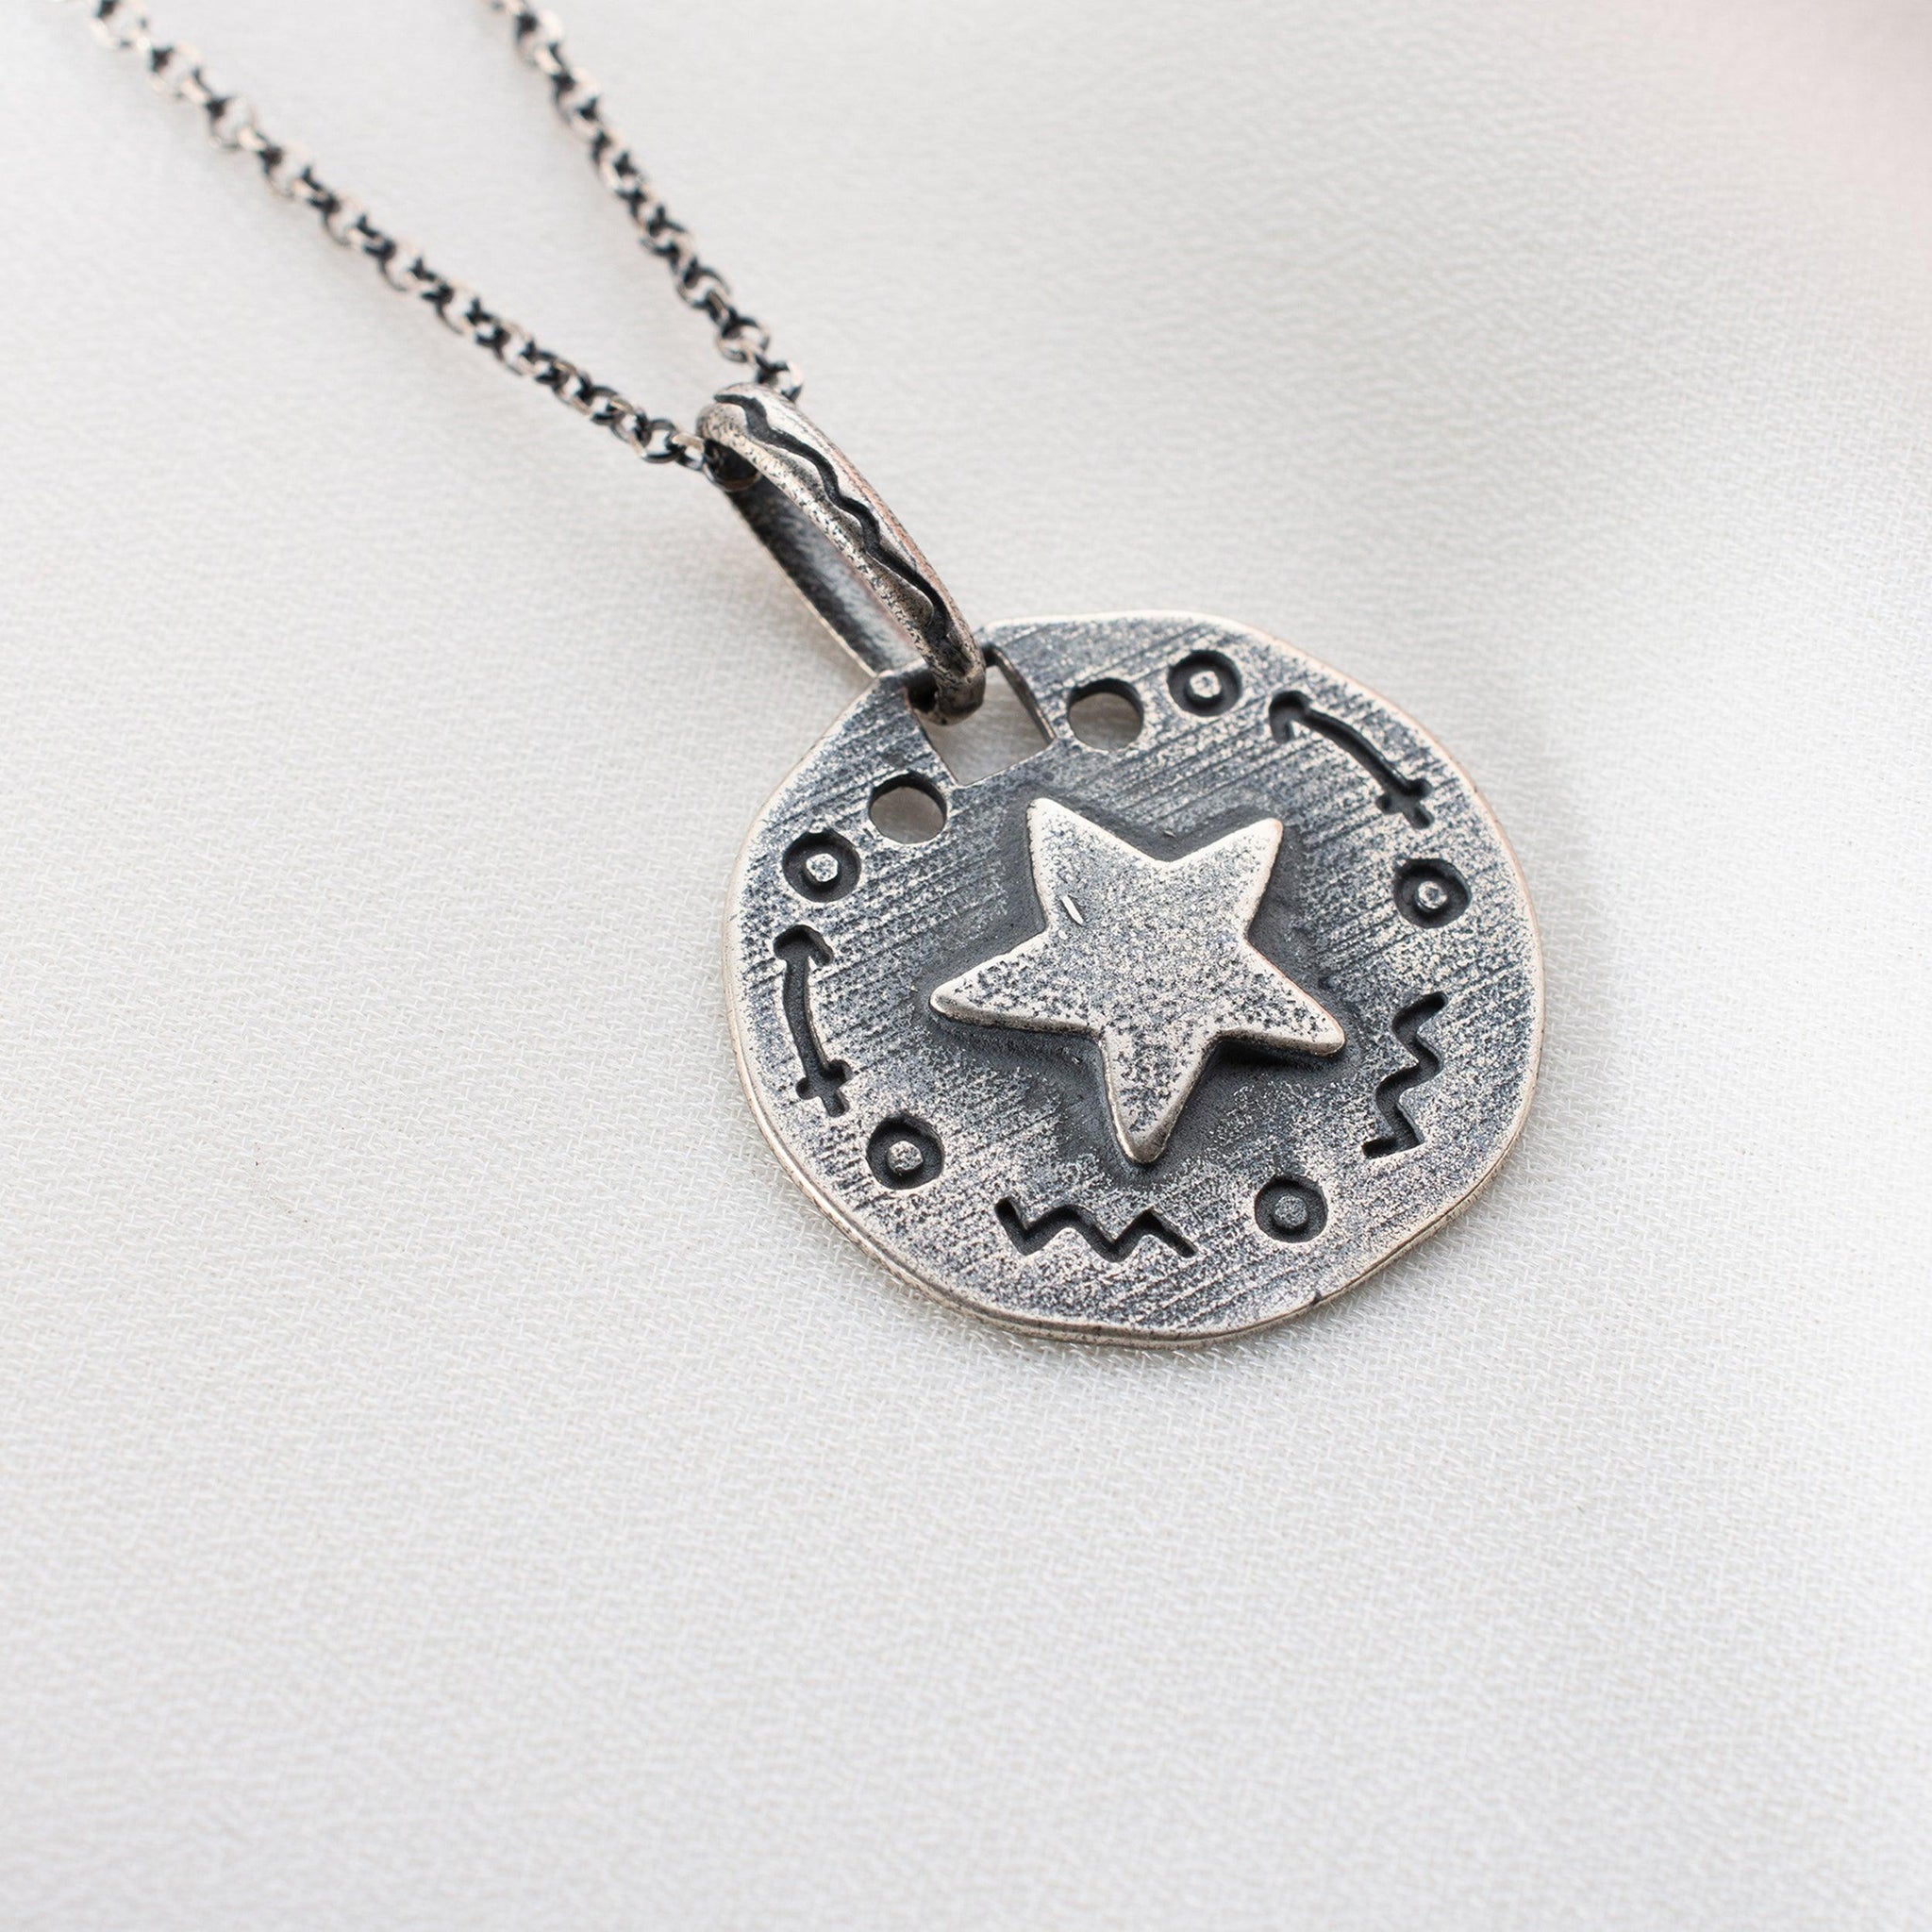 Antique Silver Star Necklace • Star Necklace Silver • Big Star Pendant - Trending Silver Gifts